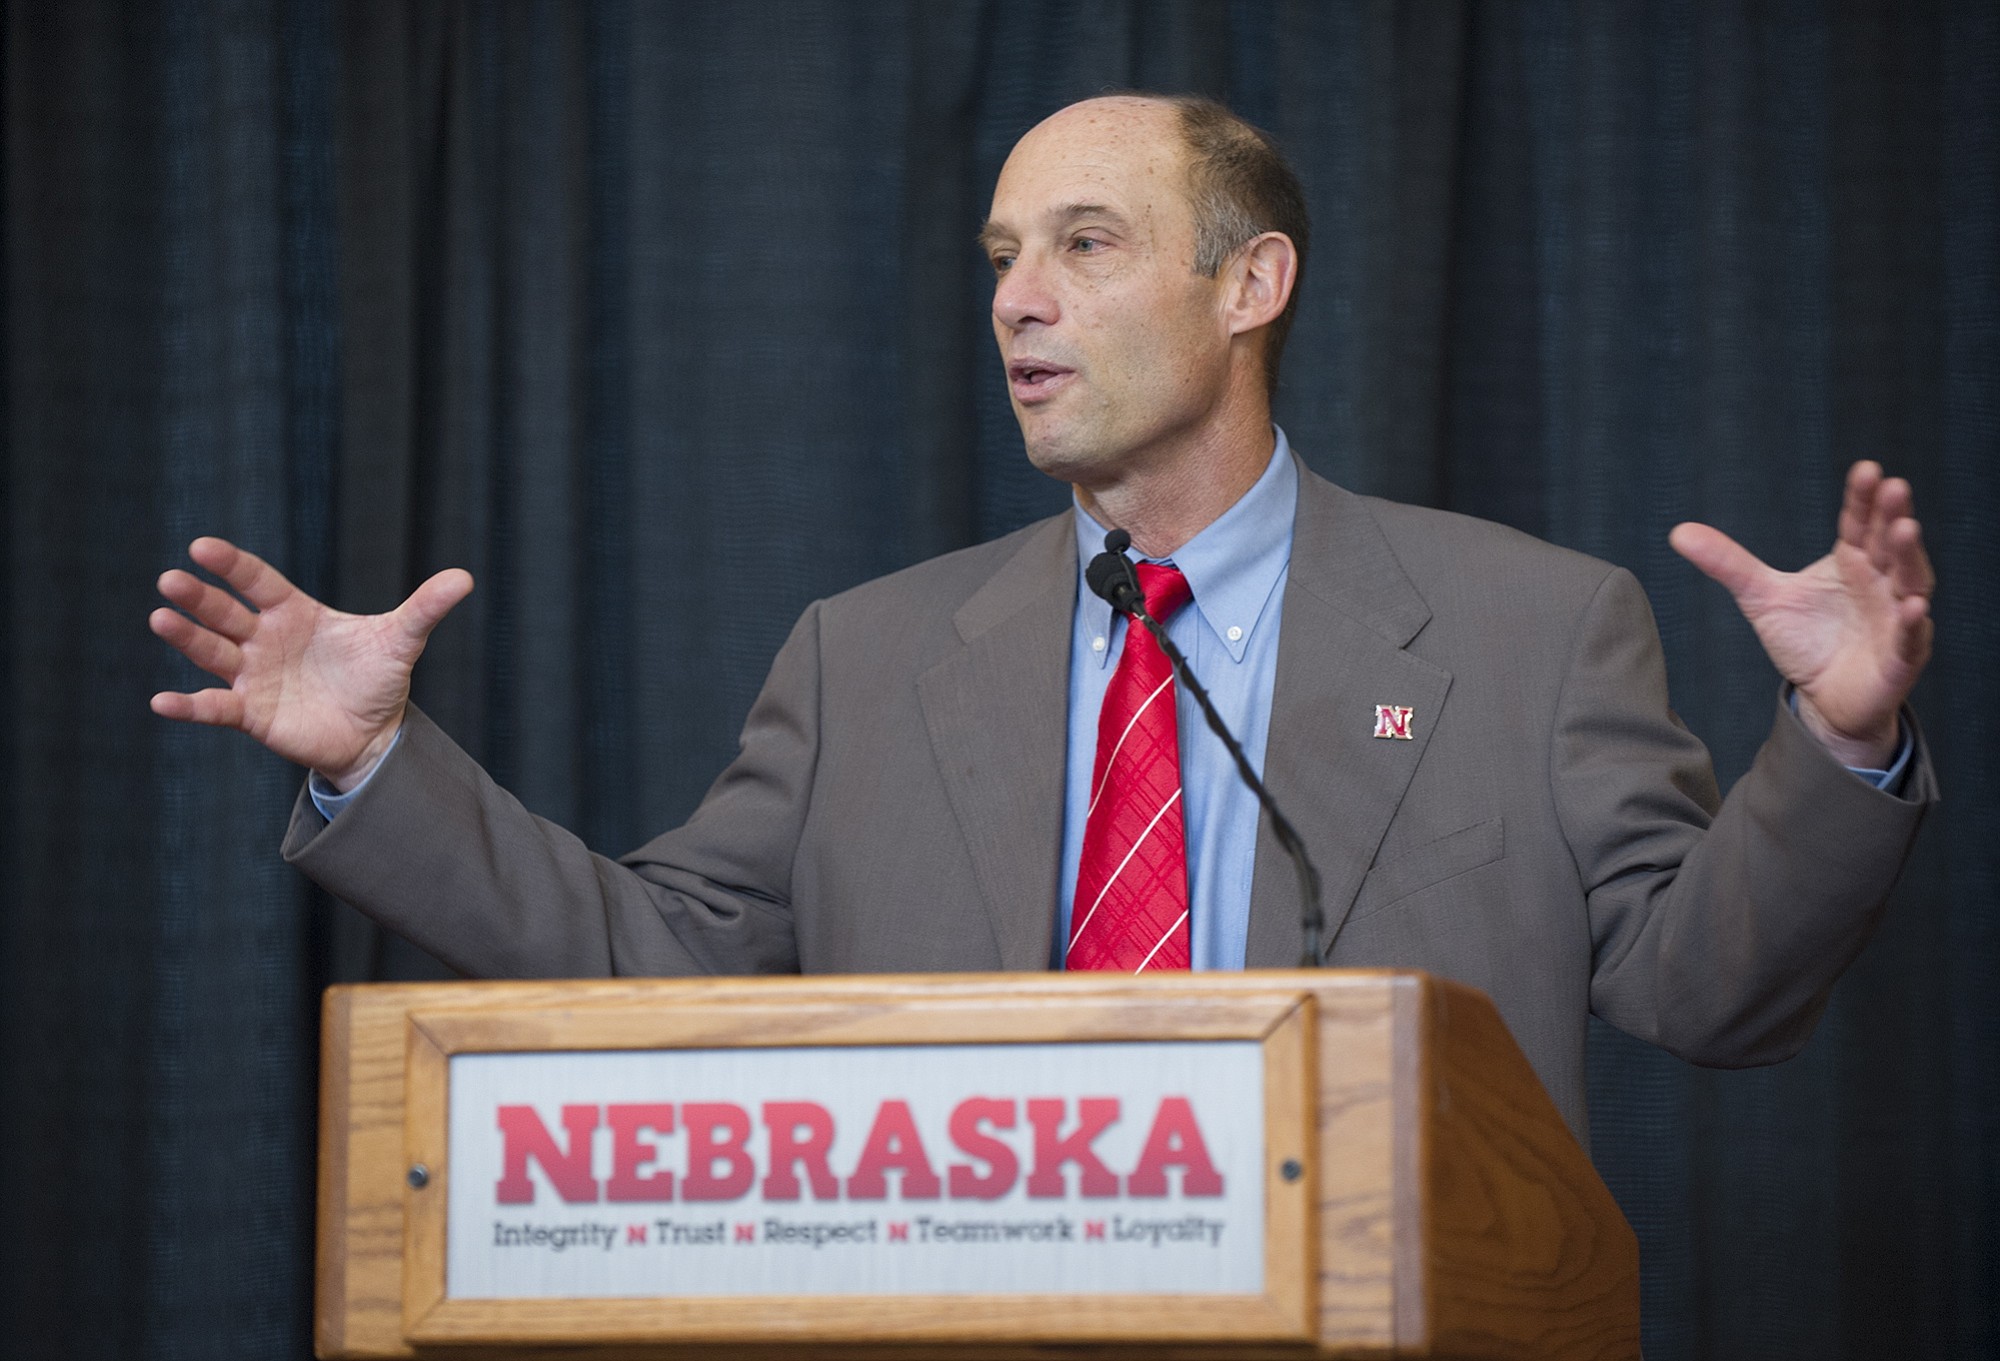 Nebraska's new football coach Mike Riley addresses the media during a news conference at Memorial Stadium on Friday, Dec. 5, 2014 in Lincoln, Neb. Riley, who came from Oregon State, replaces Bo Pelini who was fired last Sunday.